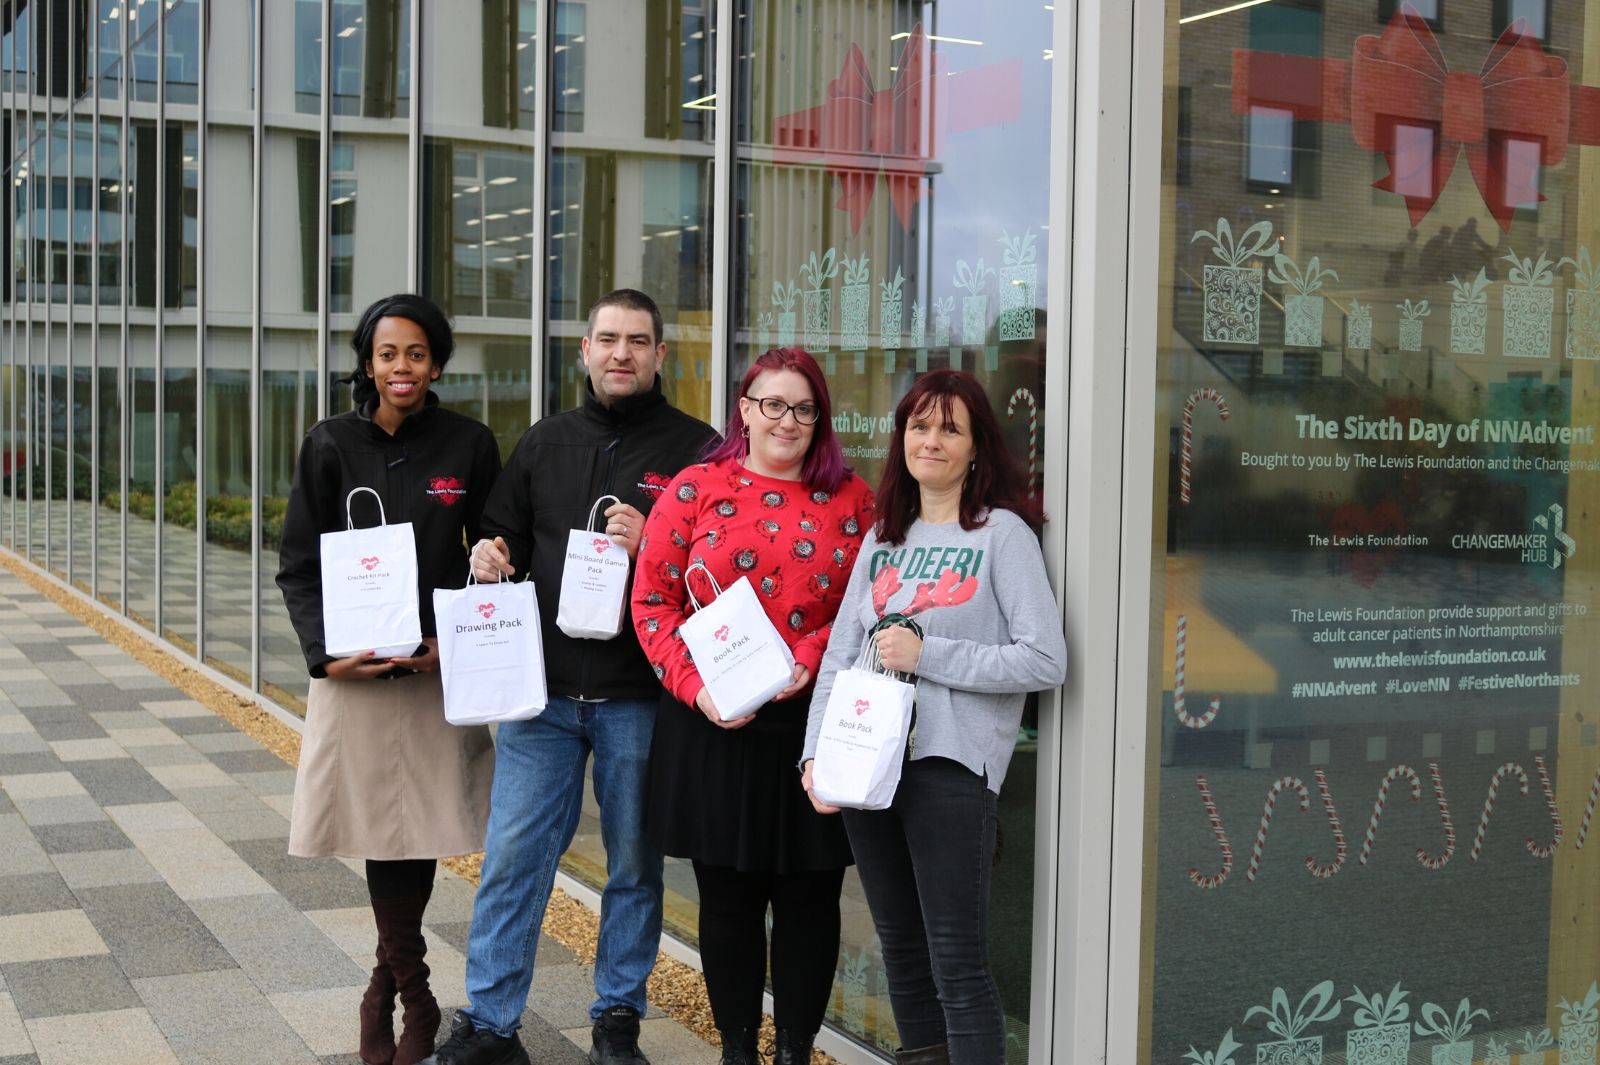 Photo of The Lewis Foundation and Changemaker staff outside the Learning Hub for the NN Advent campaign